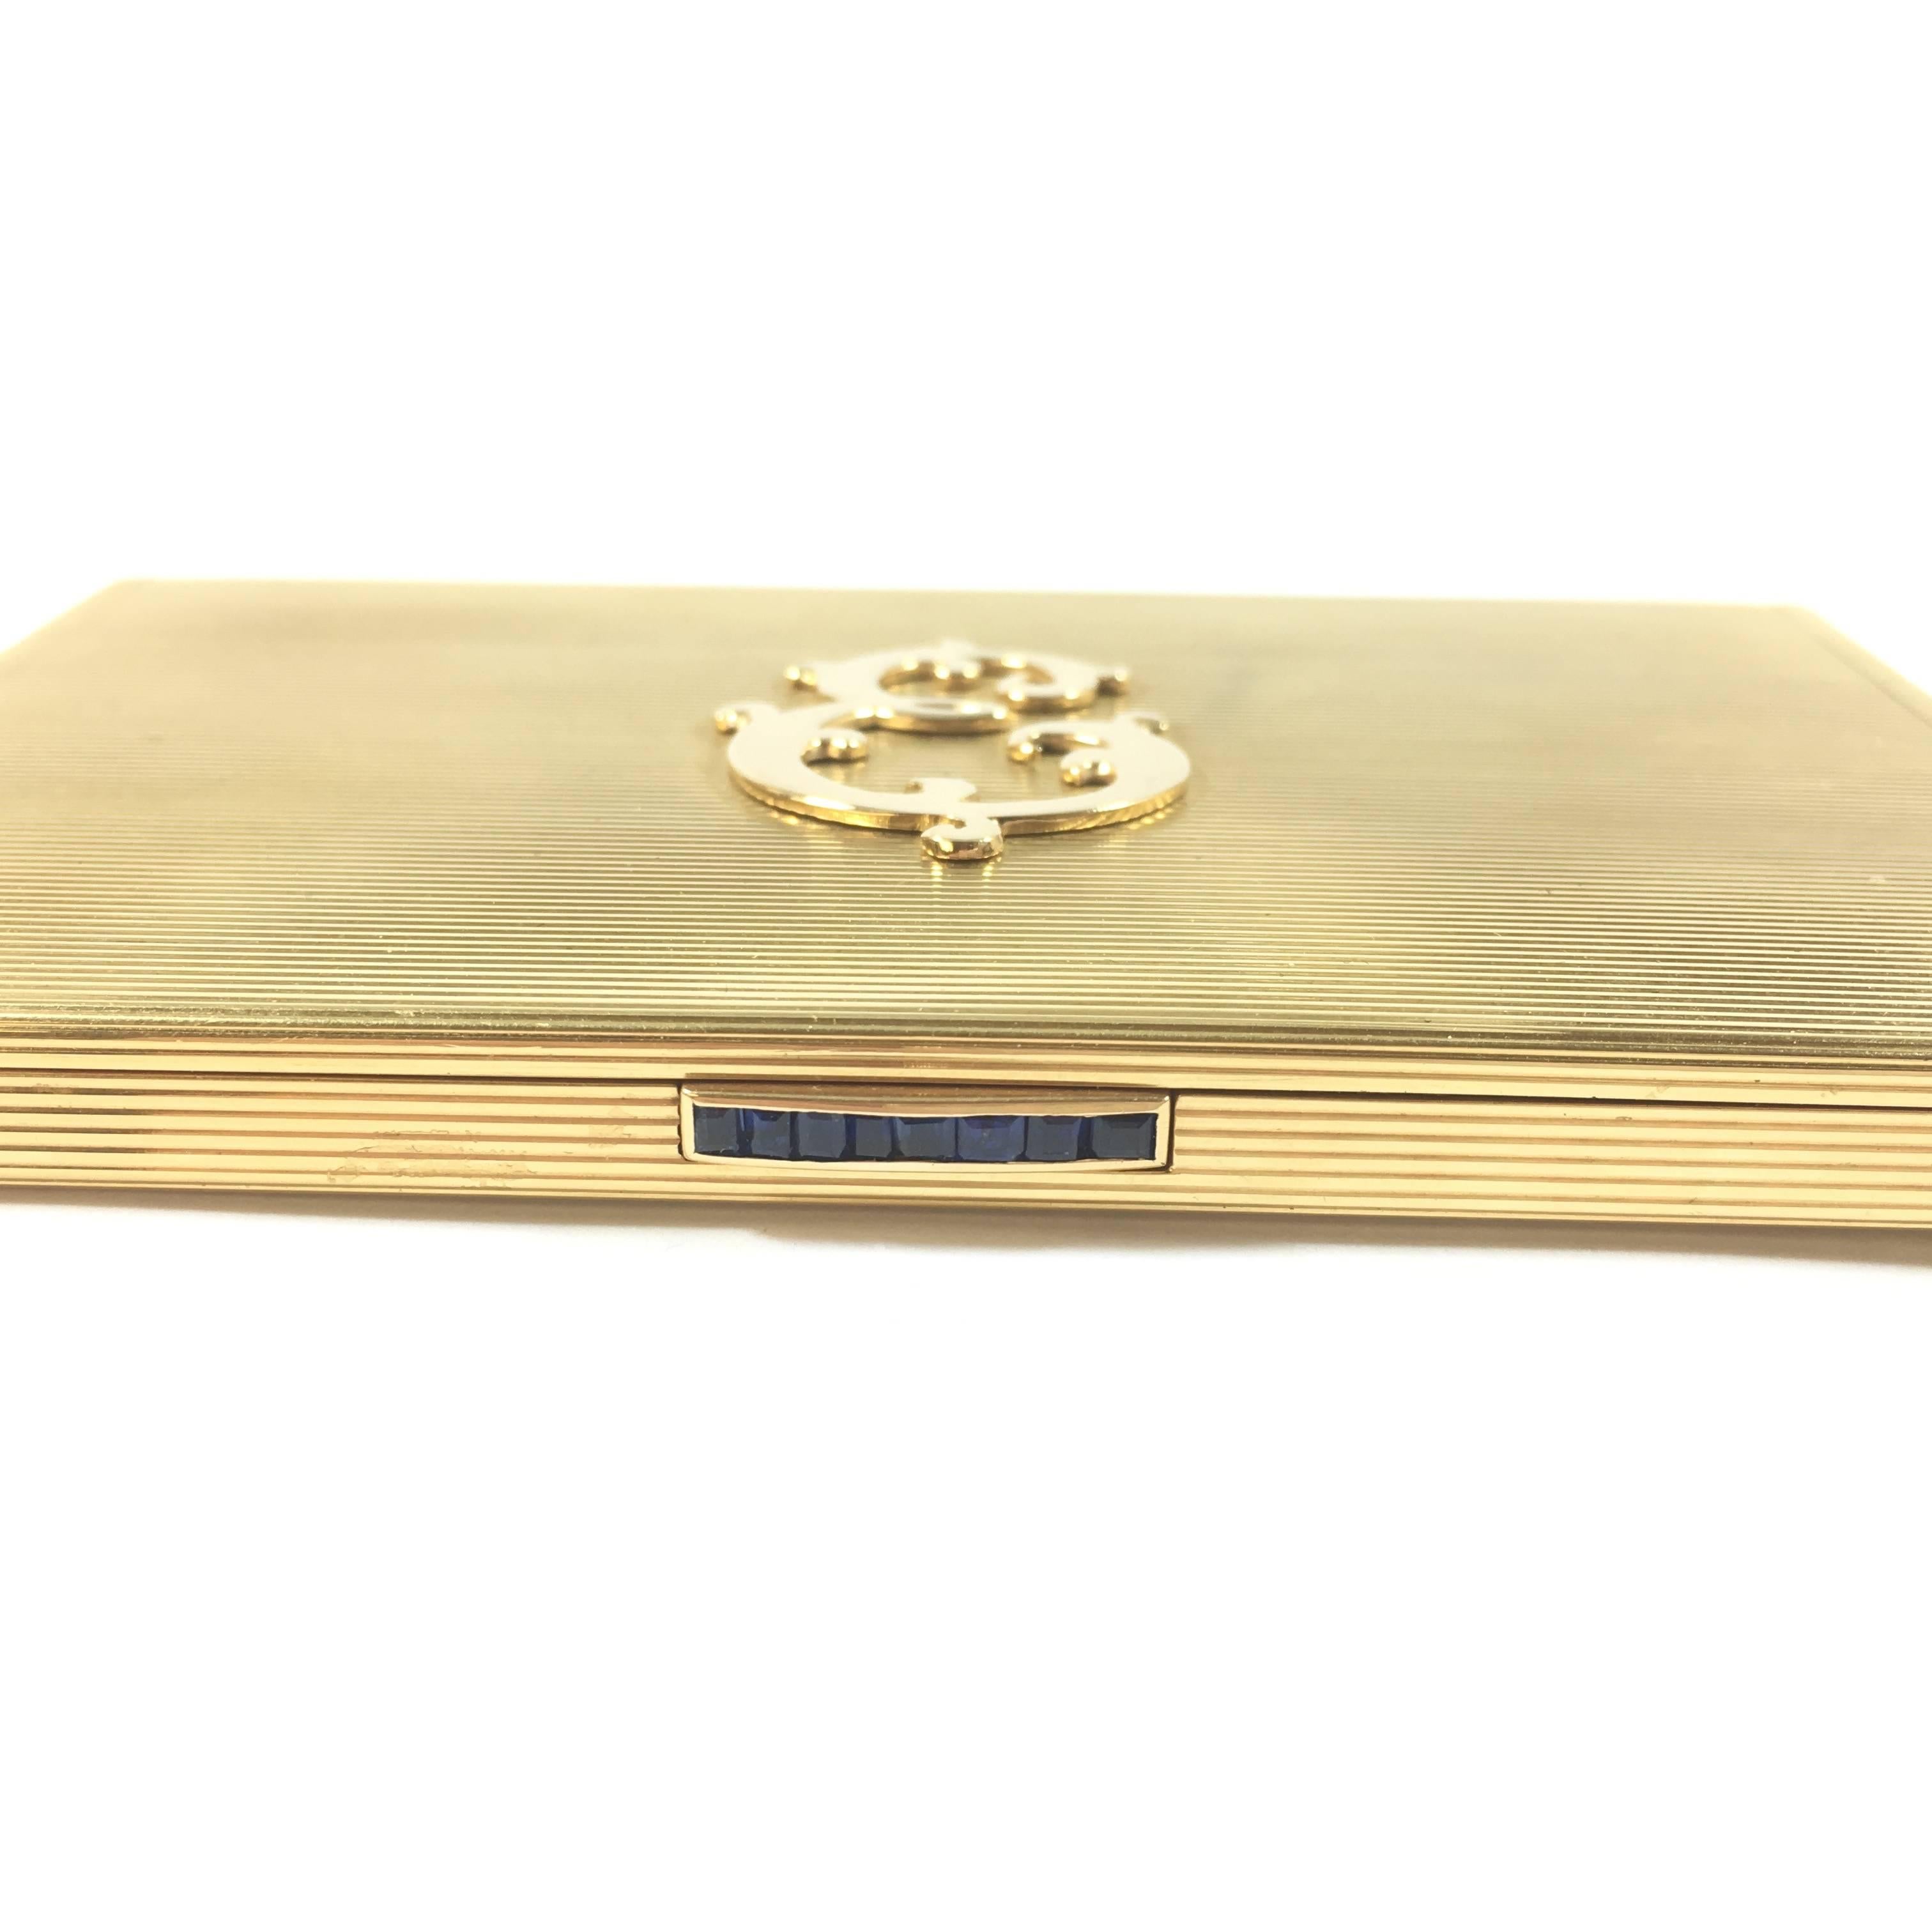 Fantastic 18K yellow gold compact powder case by Bvlgari. Powder, brush and pad all original, never been used. 
Measurements:
120 mm L x 80 mm W x 8 mm H. 
Weight: 295.4 grams
The clasp is adorned with 8 square cut blue sapphires. 
Signed: